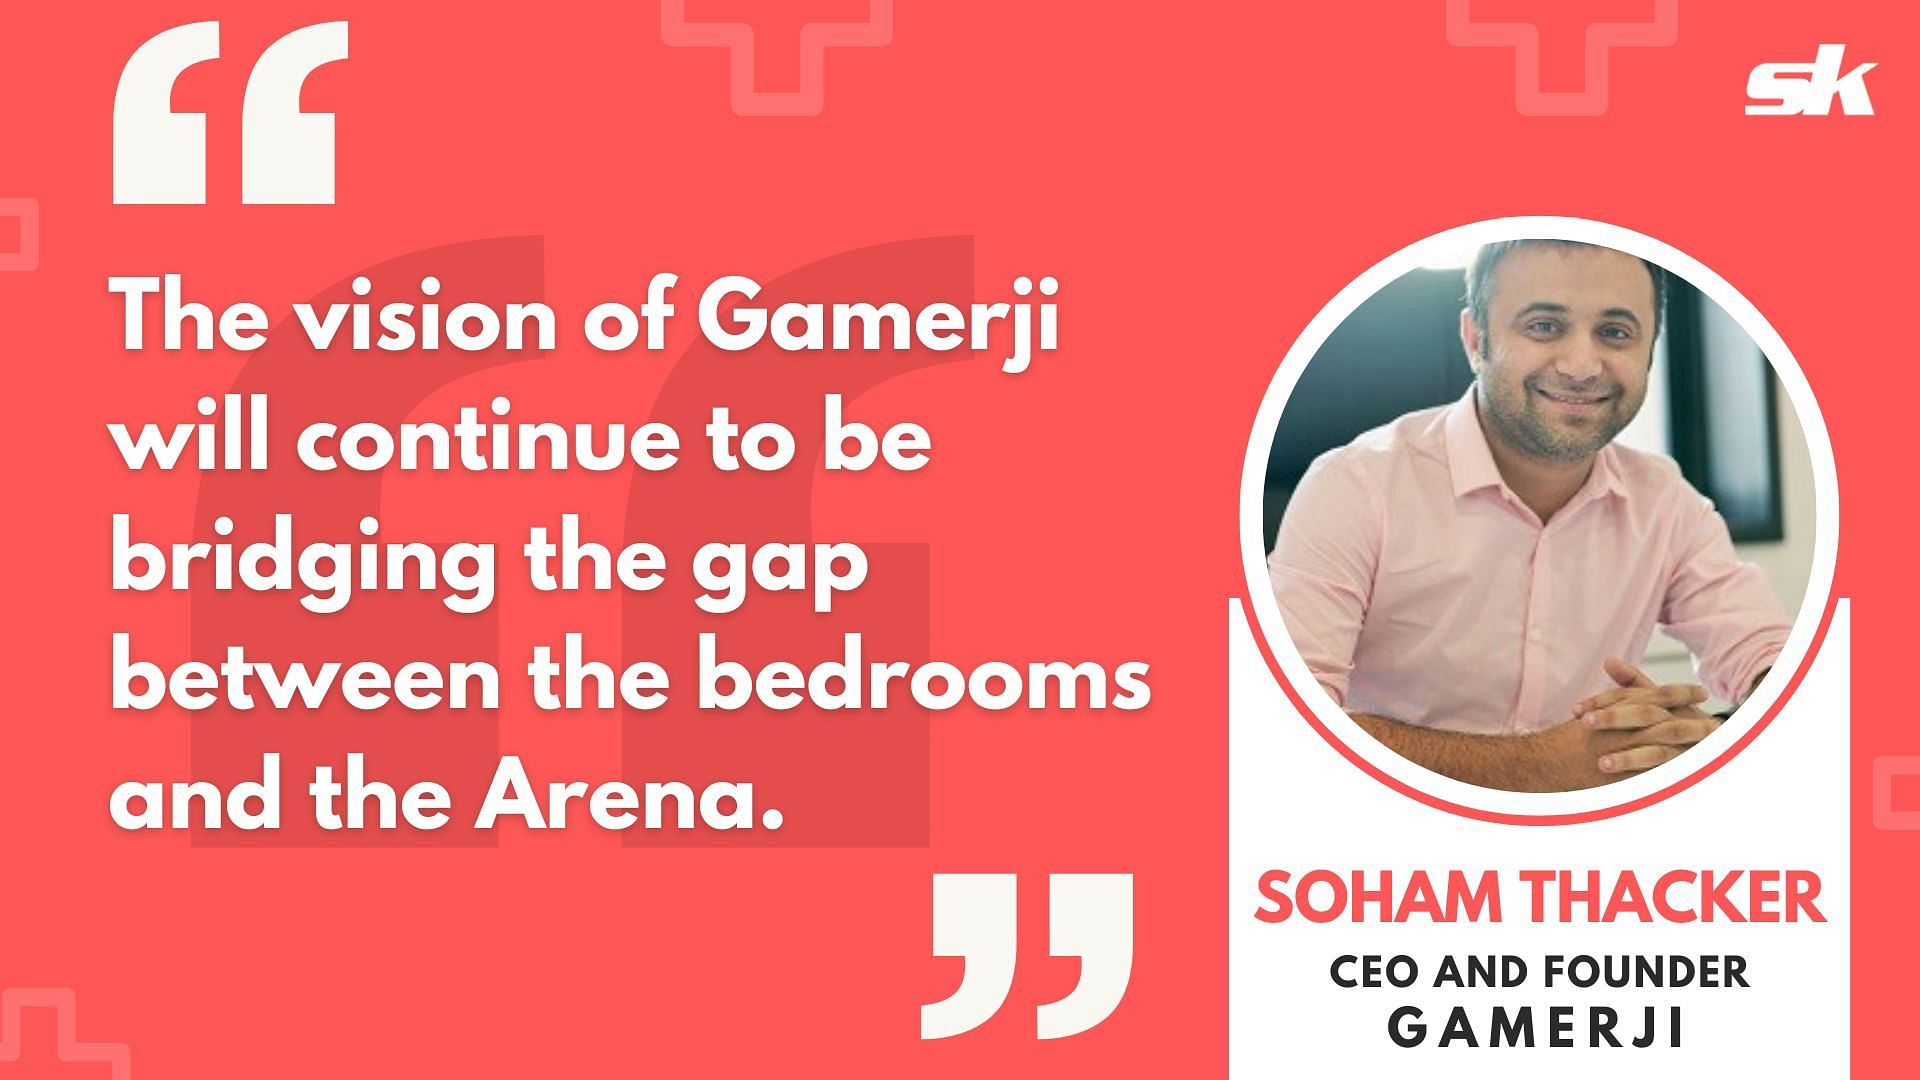 Gamerji aims to be a platform that provides gamers with opportunities to showcase their skills, improve their abilities, and reach their full potential.